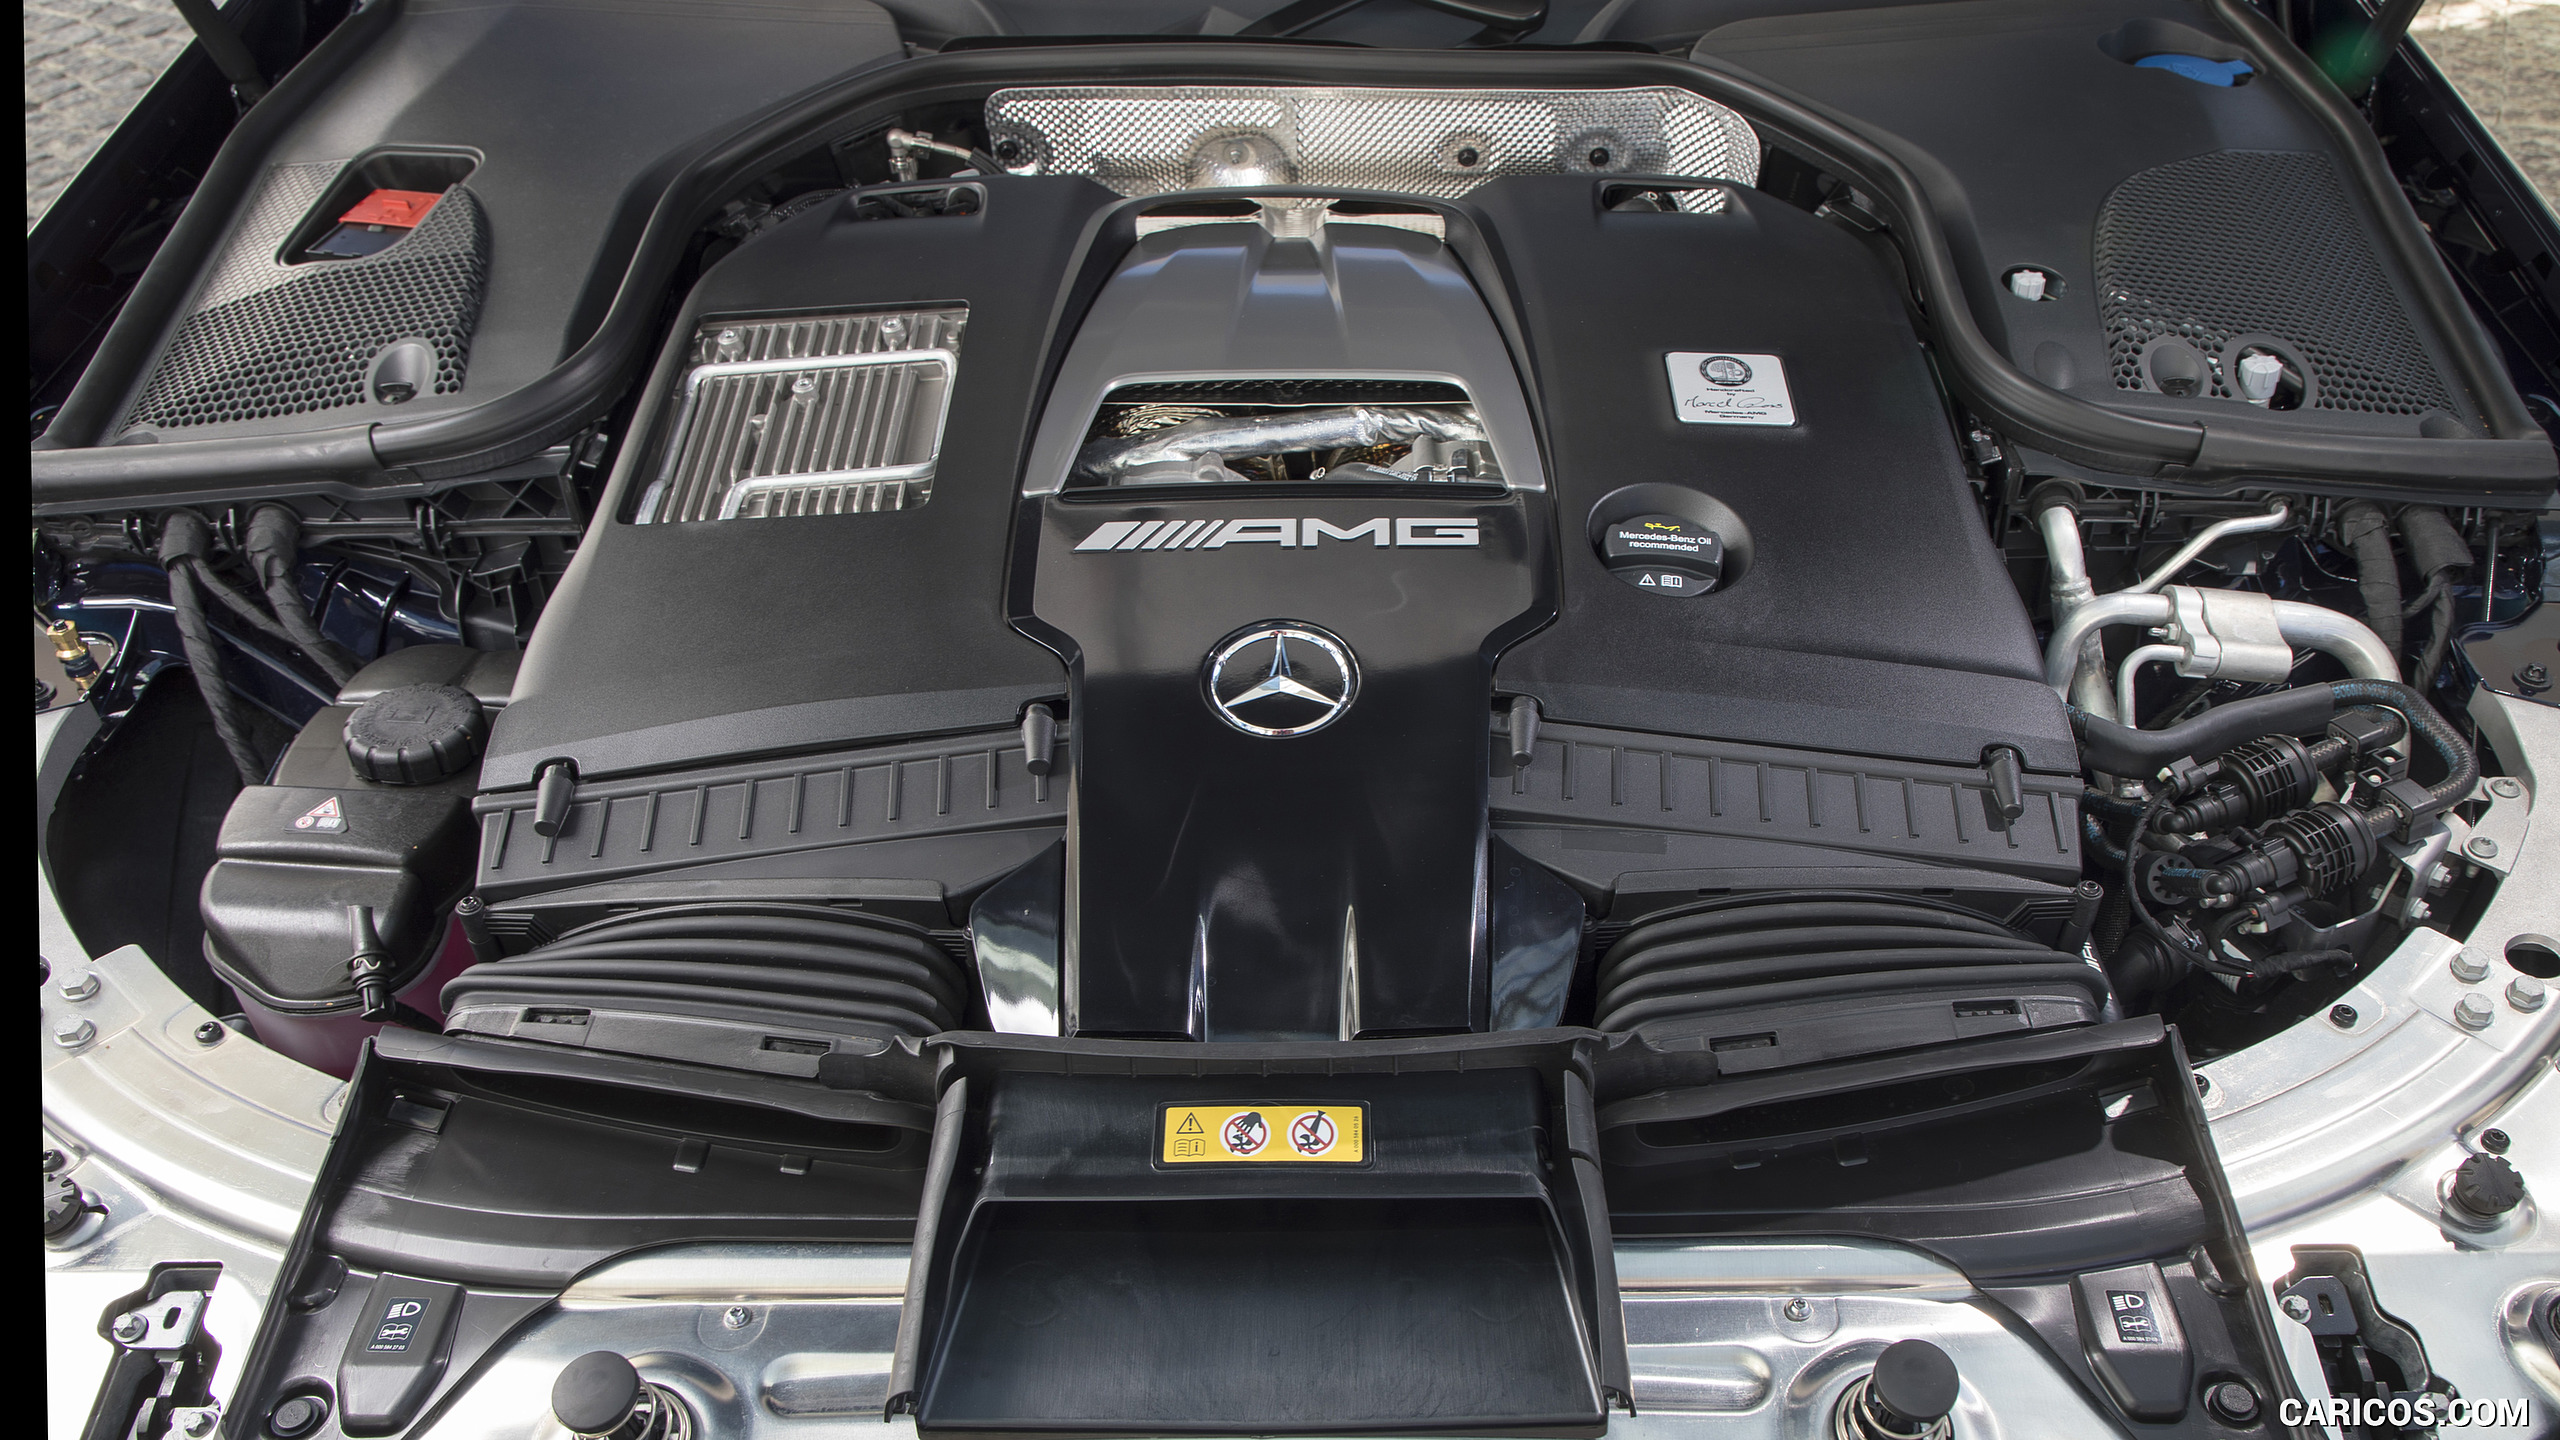 2018 Mercedes-AMG E63 S 4MATIC+ - Engine, #225 of 323